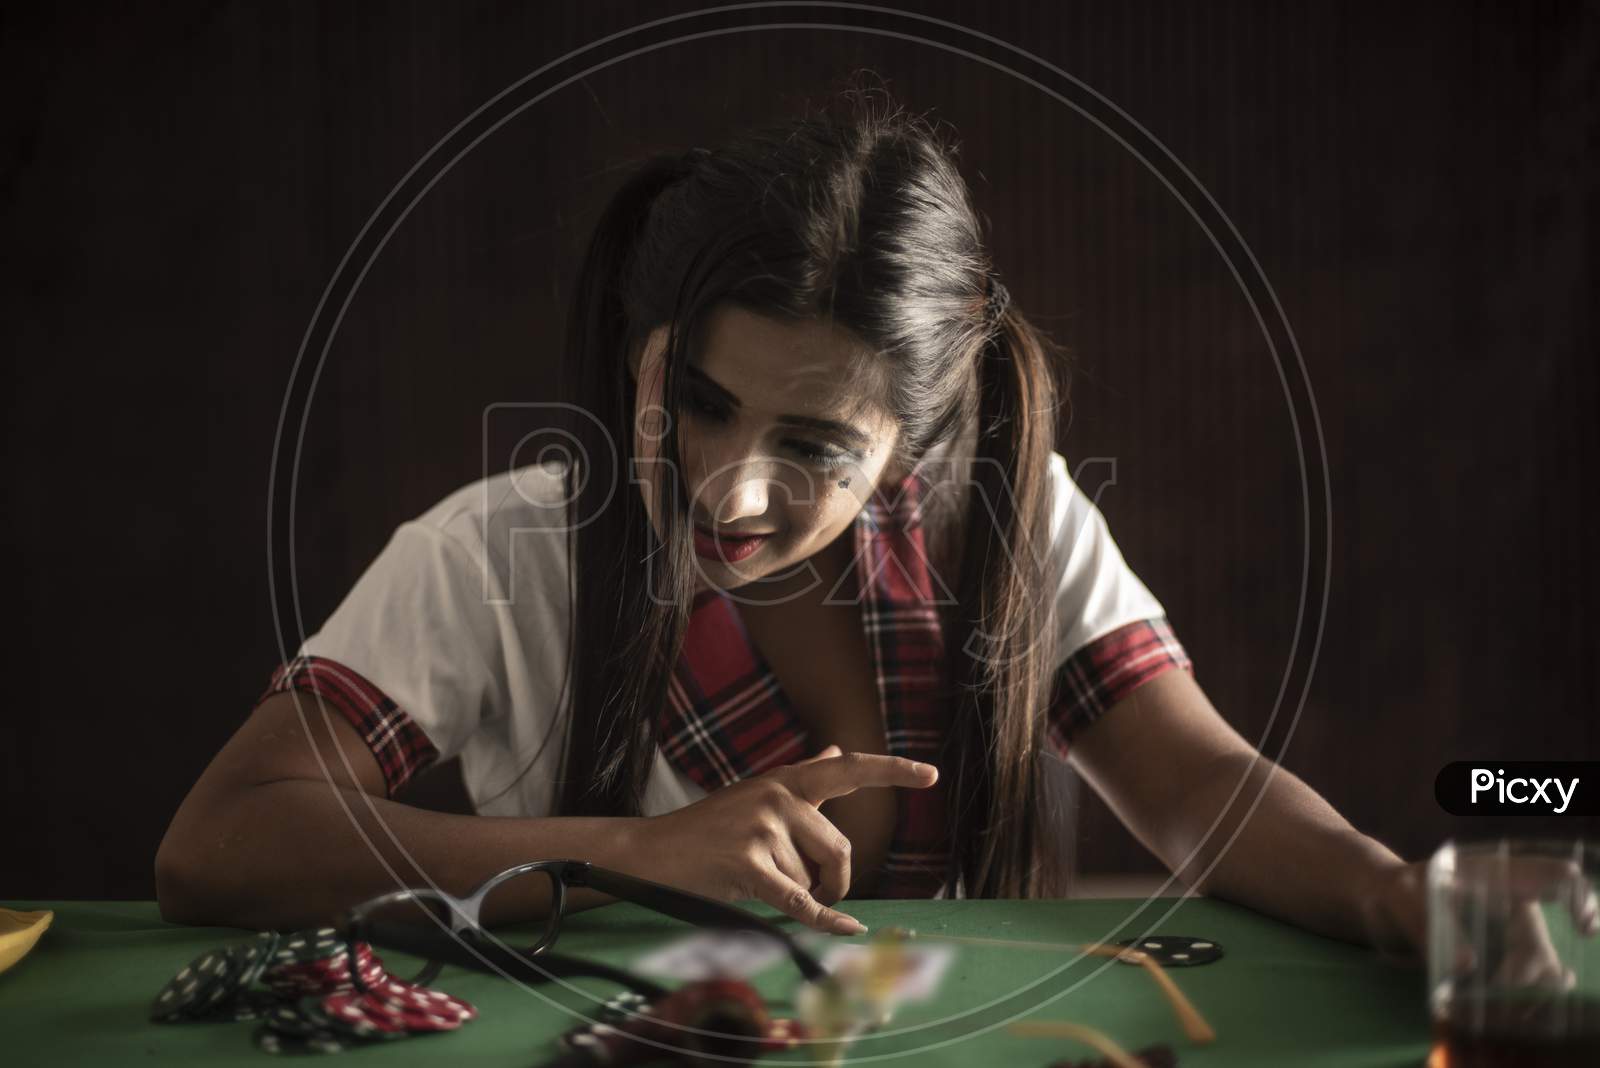 Young Indian Bengali brunette woman in school uniform playing cards on a casino poker table in brown textured copy space studio background. Indian lifestyle and fashion.